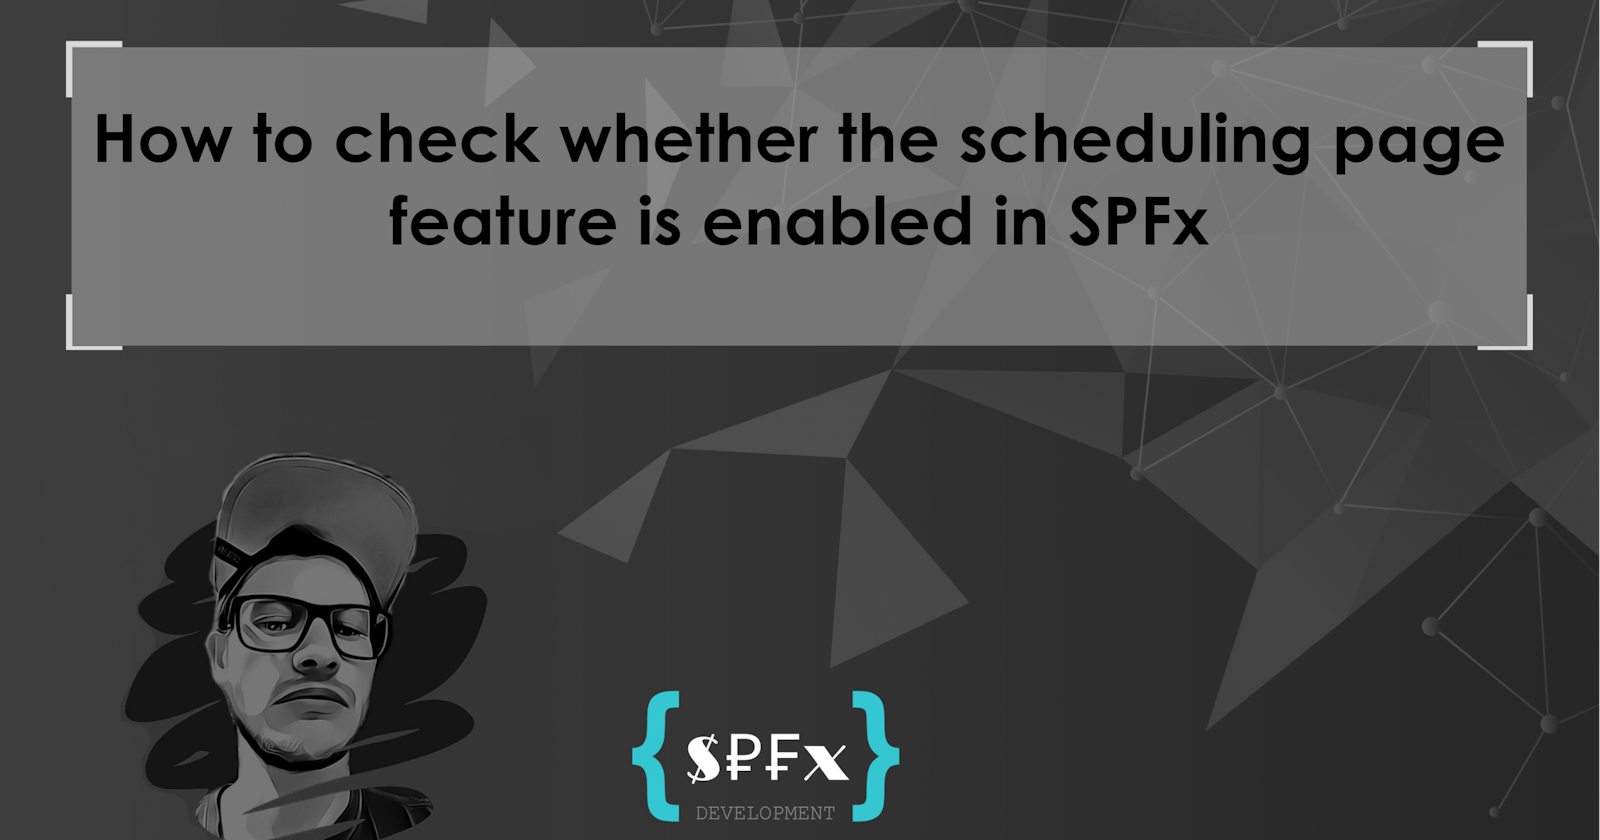 How to check whether the scheduling page feature is enabled in SPFx